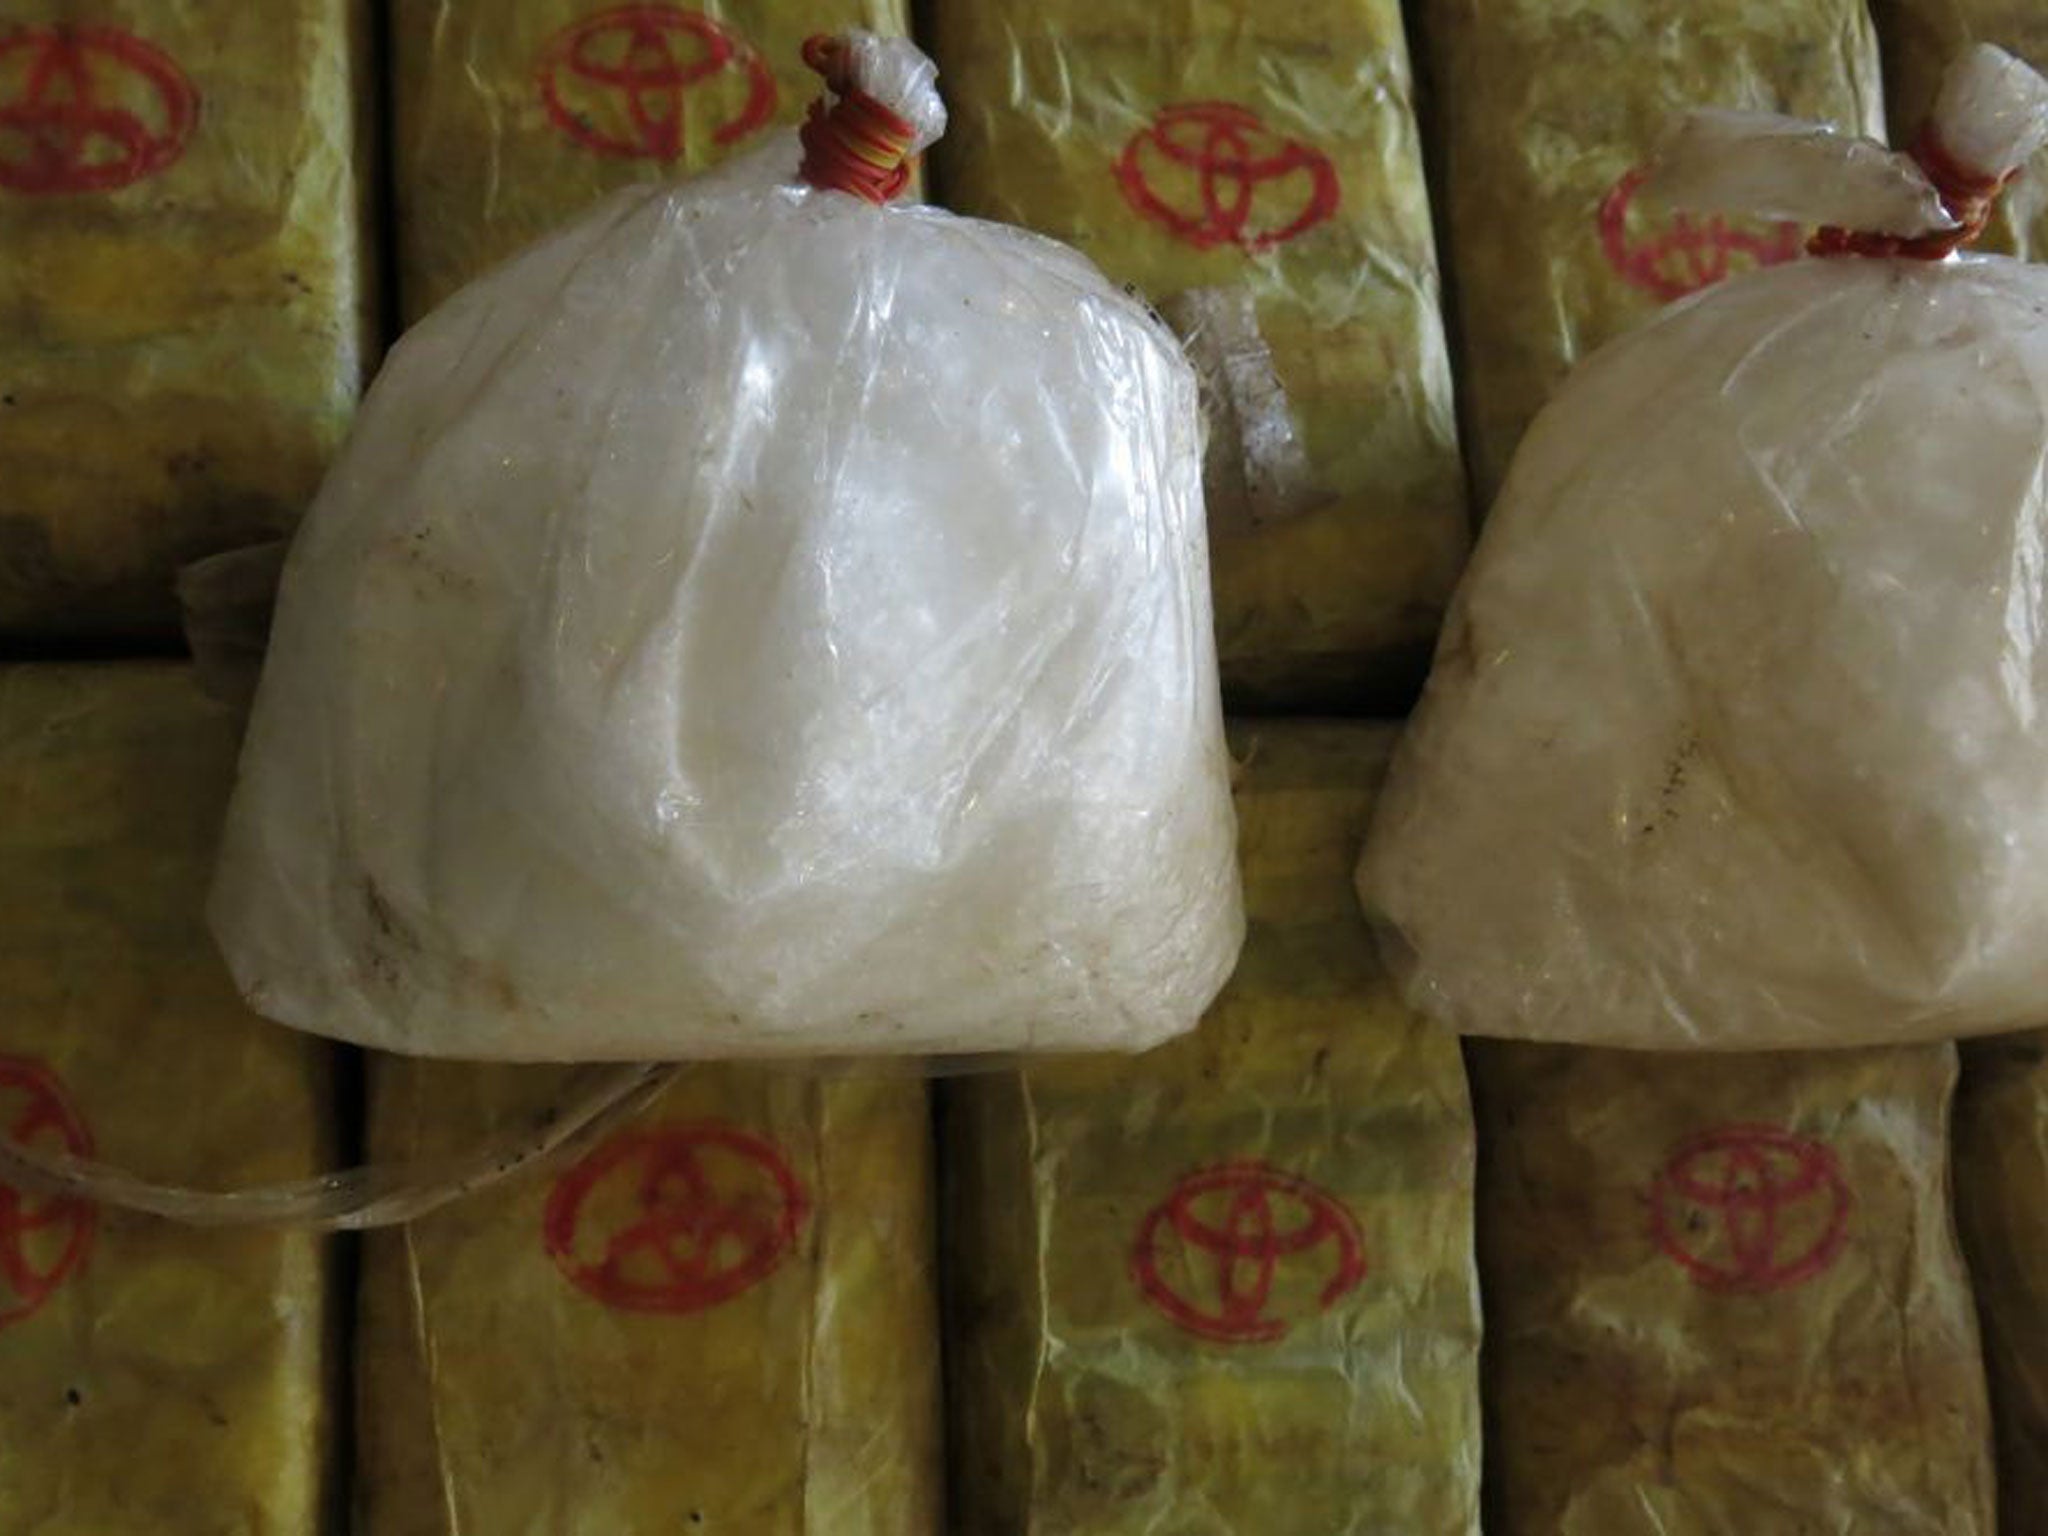 File photo showing two bags of crystal meth